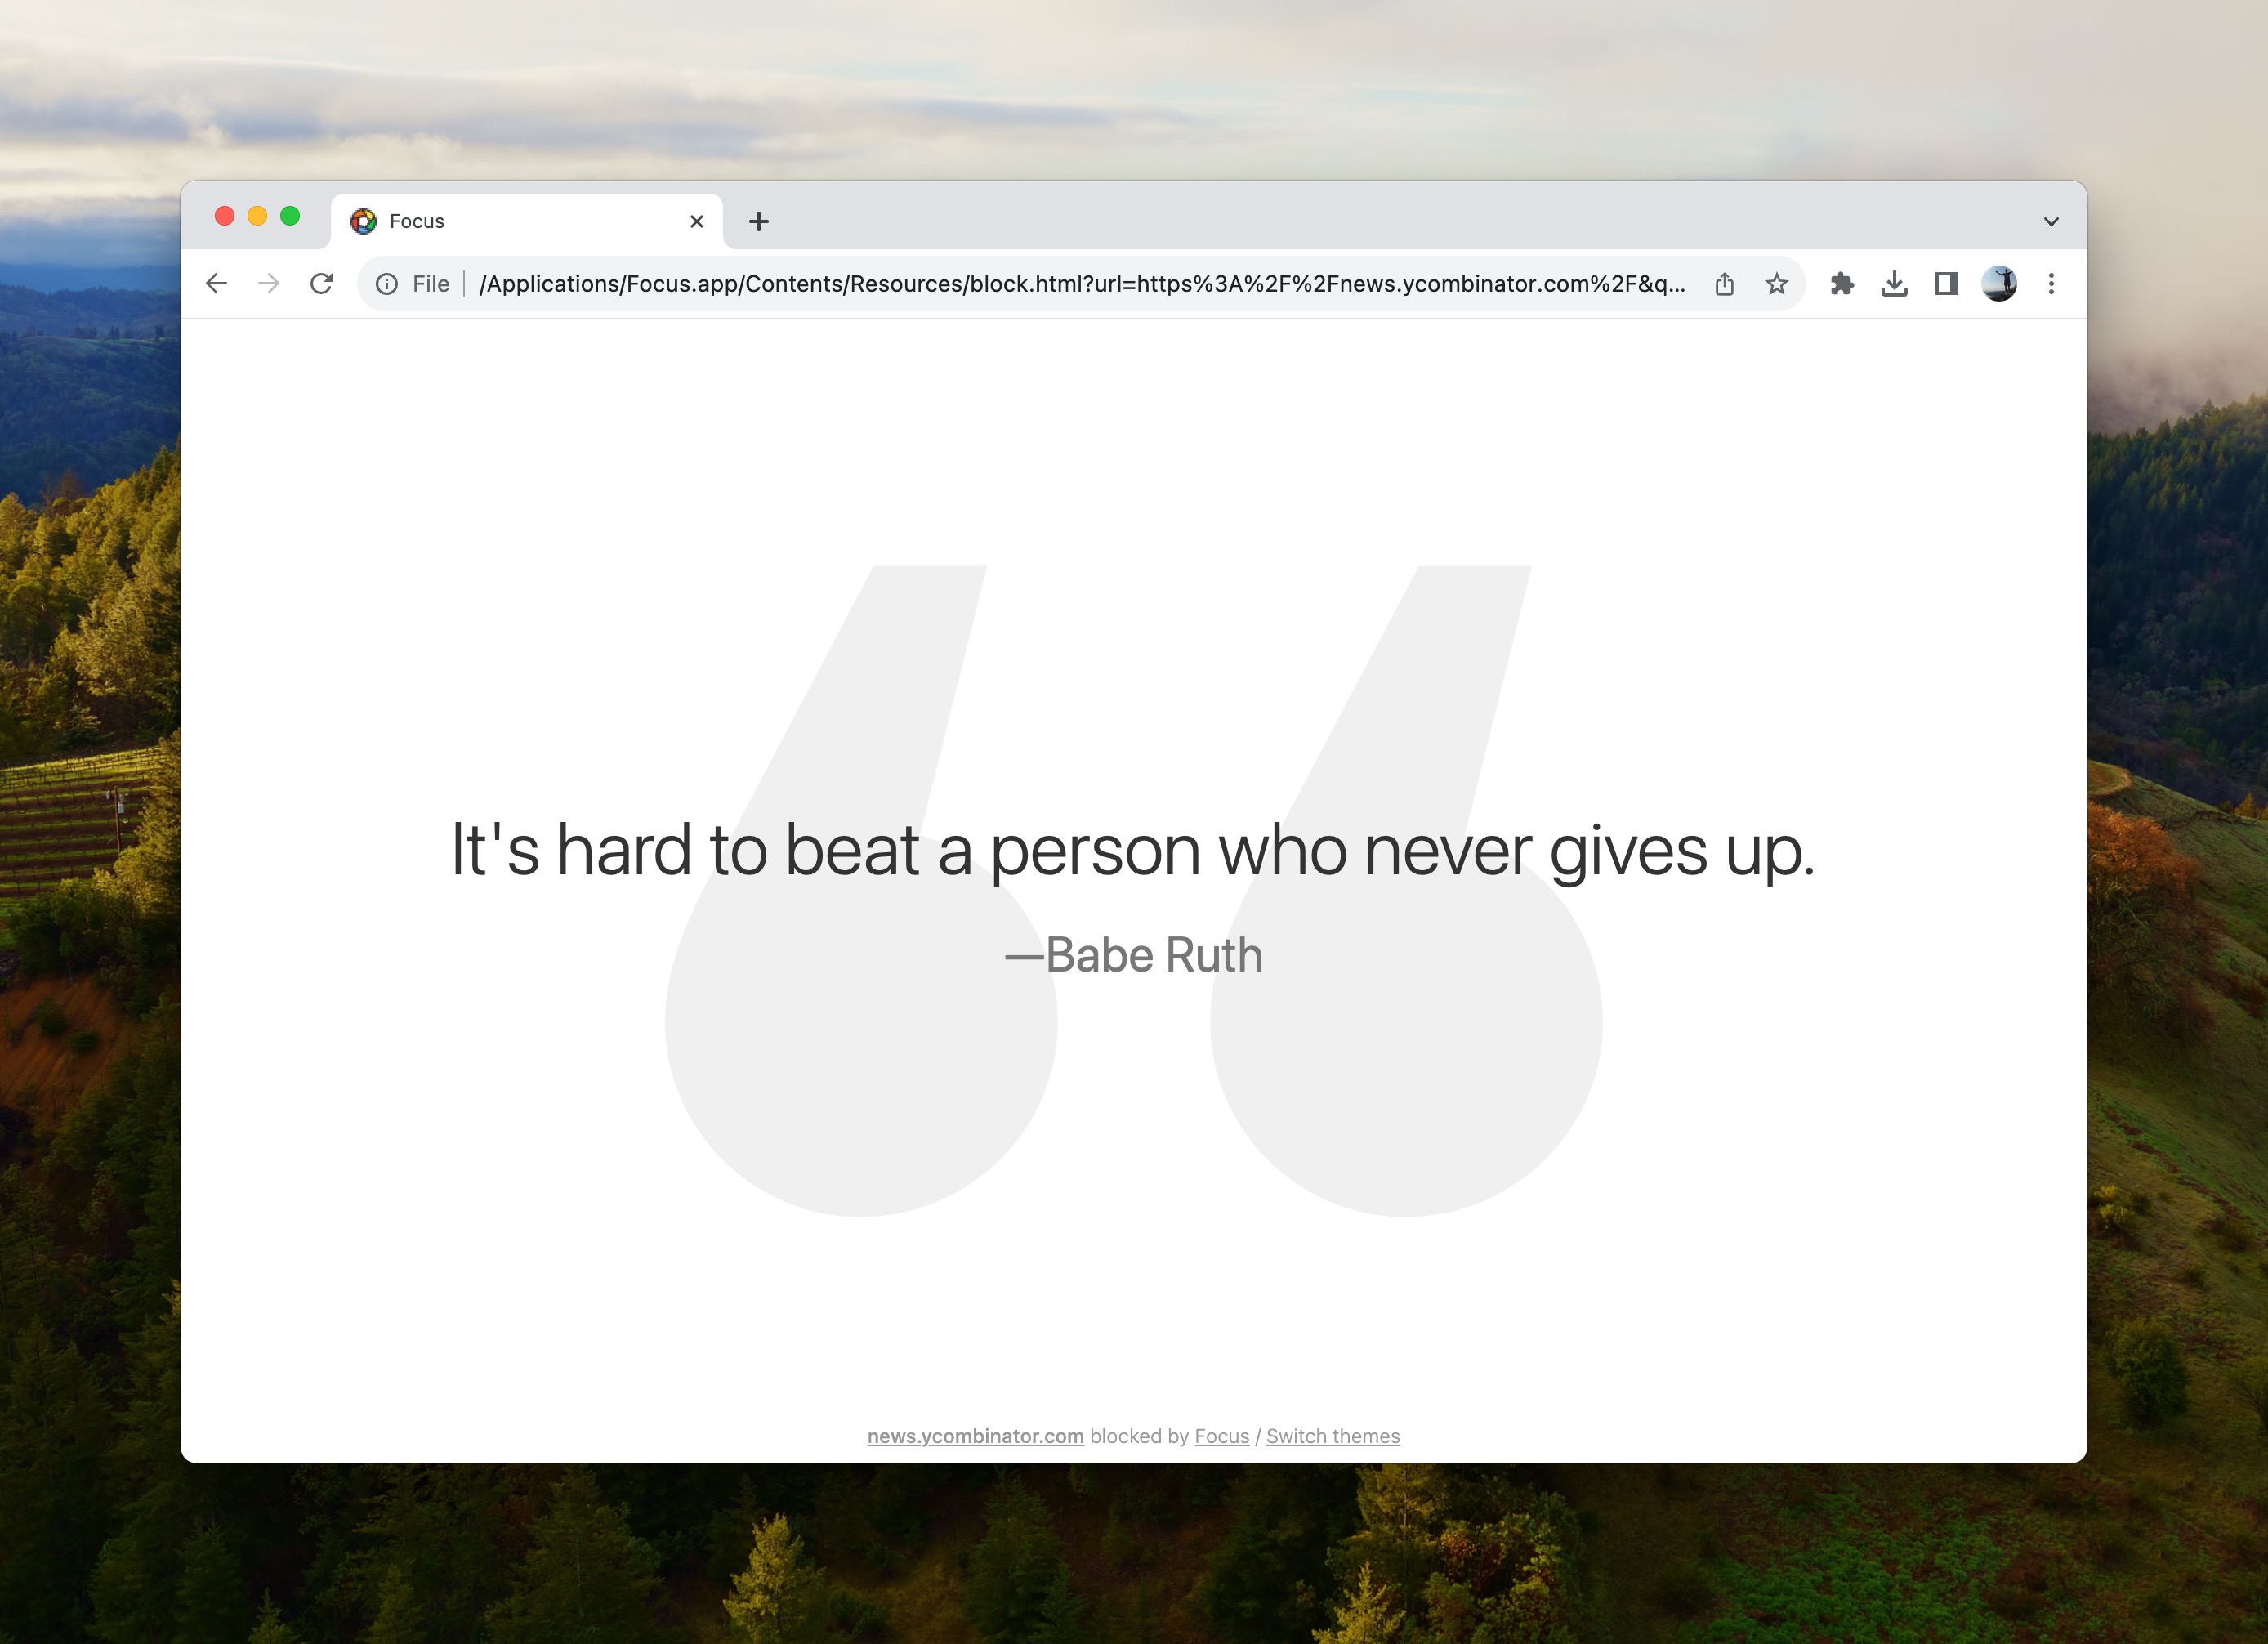 Focus replaces distracting websites with inspirational quotes.